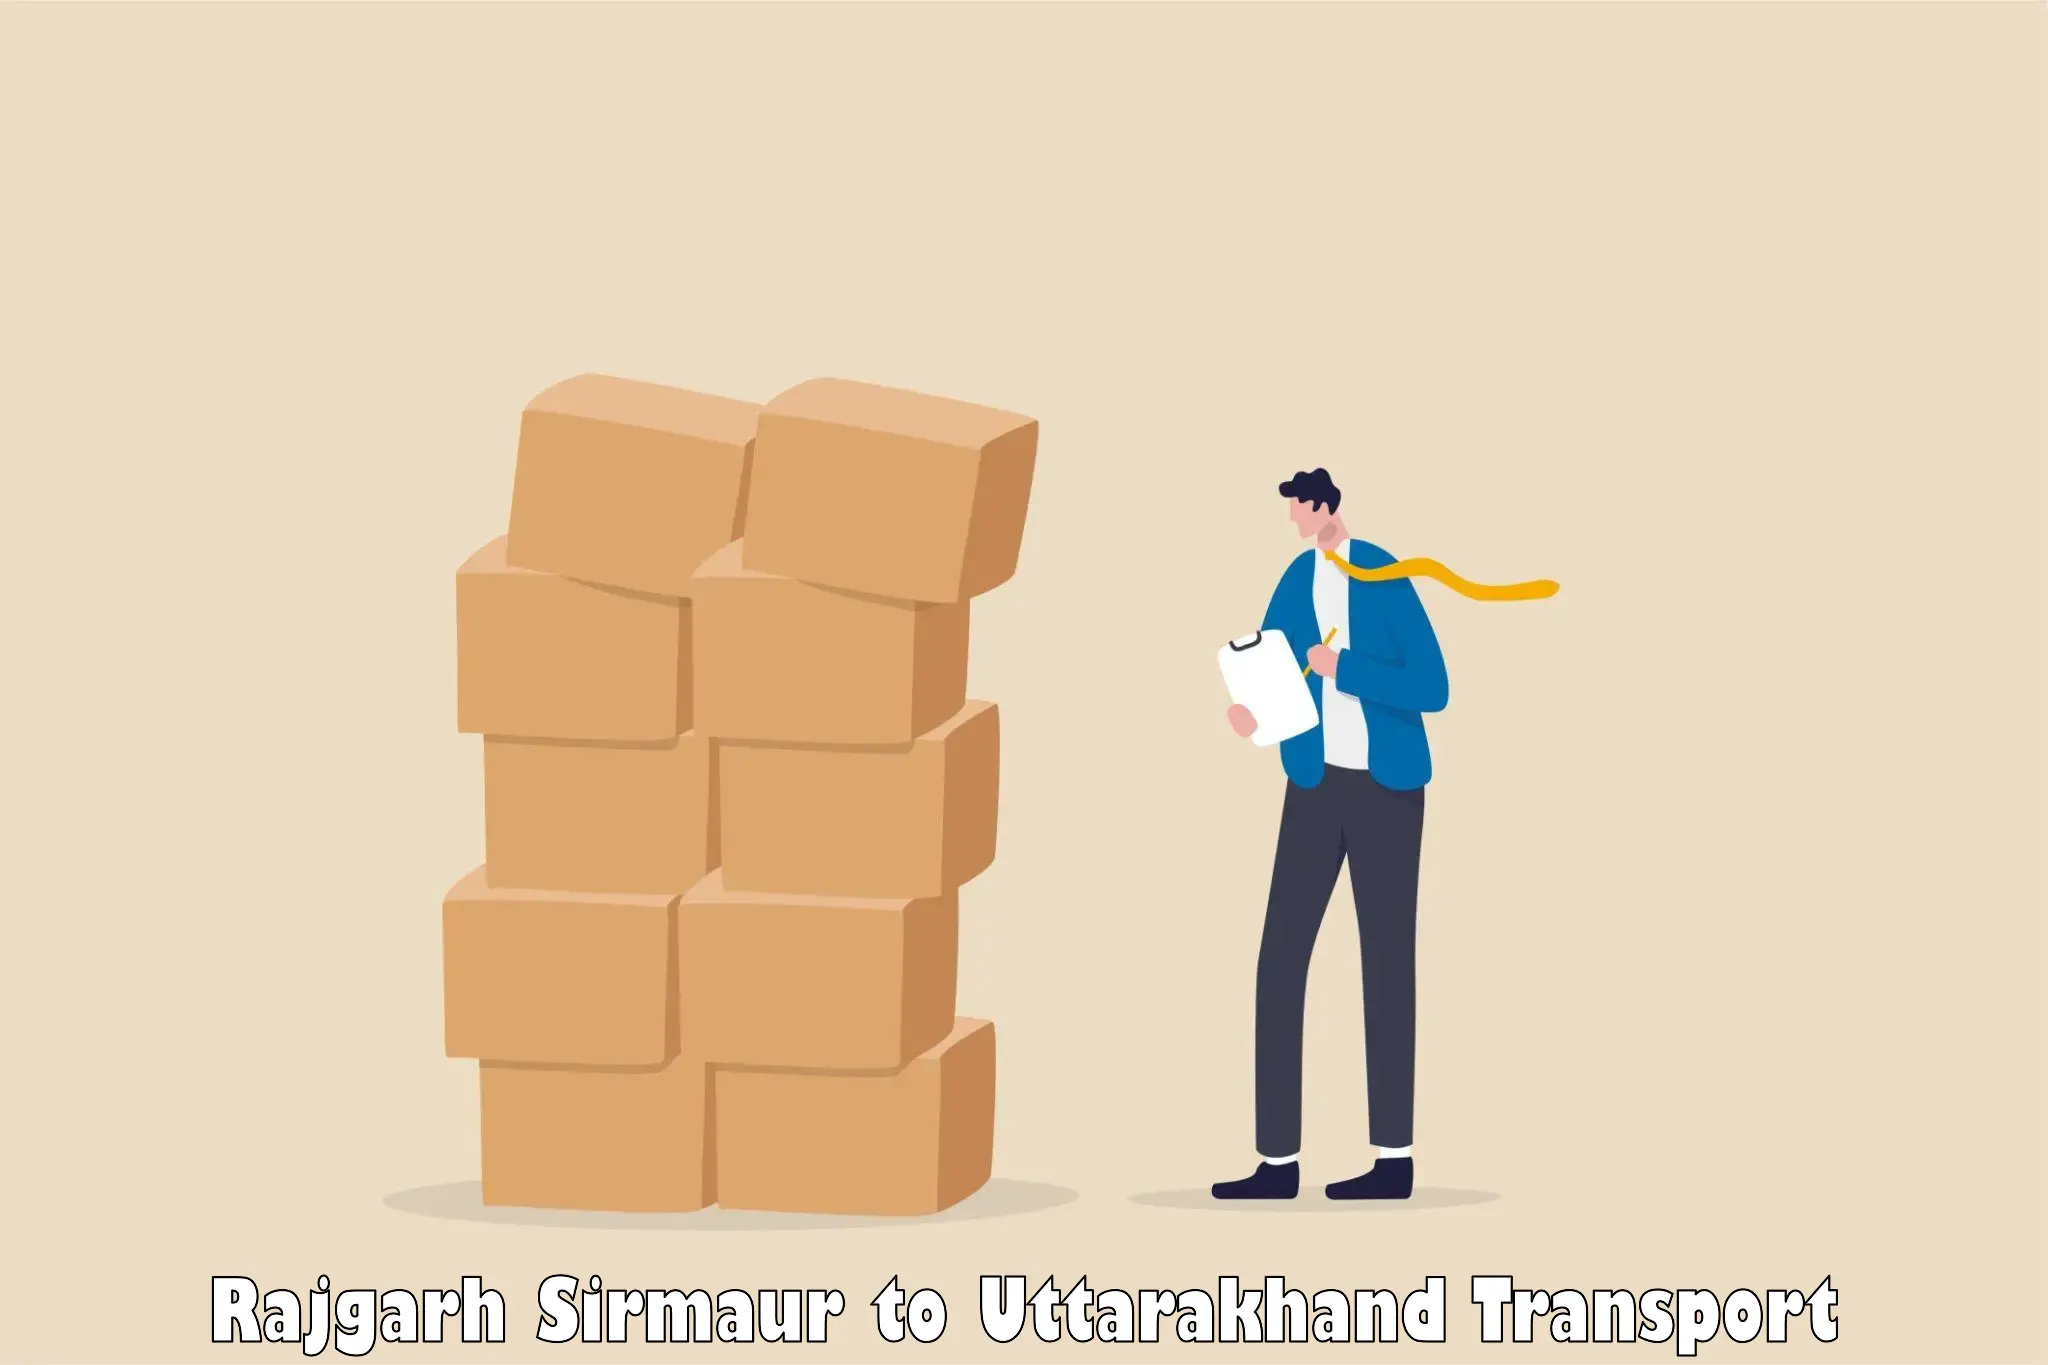 Commercial transport service Rajgarh Sirmaur to Rudrapur